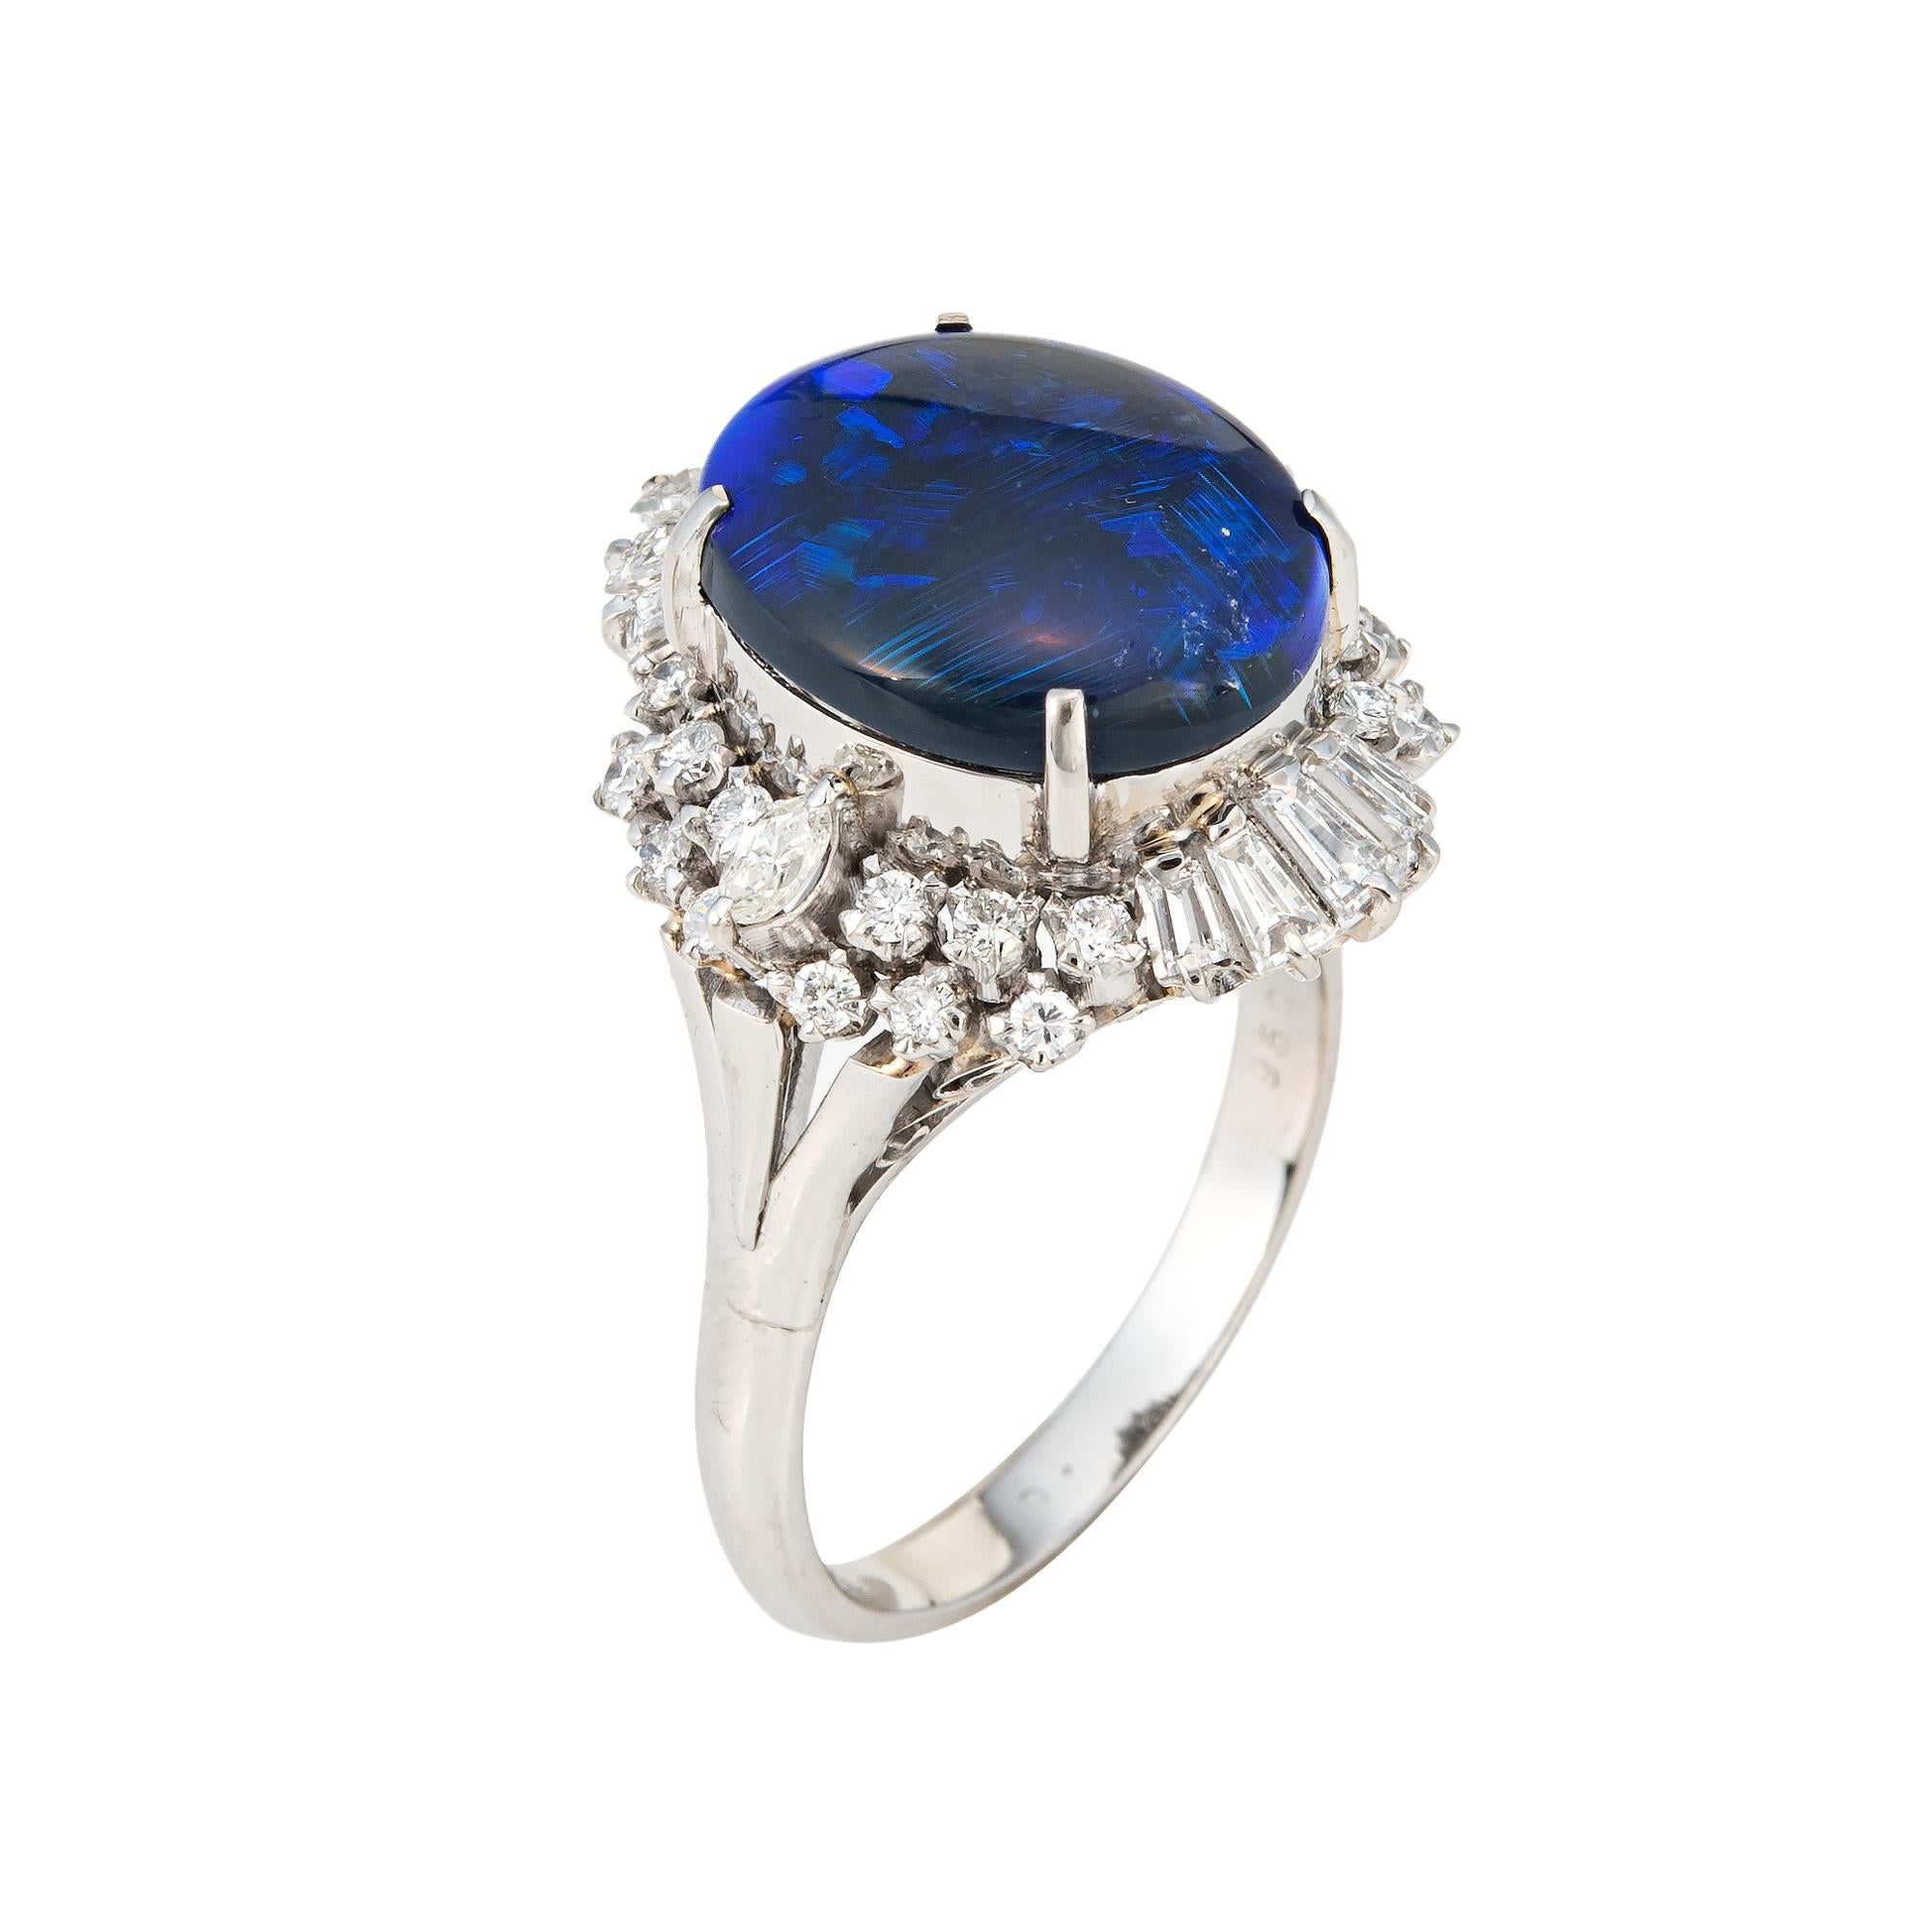 Stylish 4.58ct natural black opal & diamond cocktail ring crafted in platinum. 

Cabochon cut oval shaped natural black opal measures 14mm x 11.5mm (4.58 carats). Mixed cut diamonds (marquise, baguette & round brilliant cuts) total an estimated 0.96